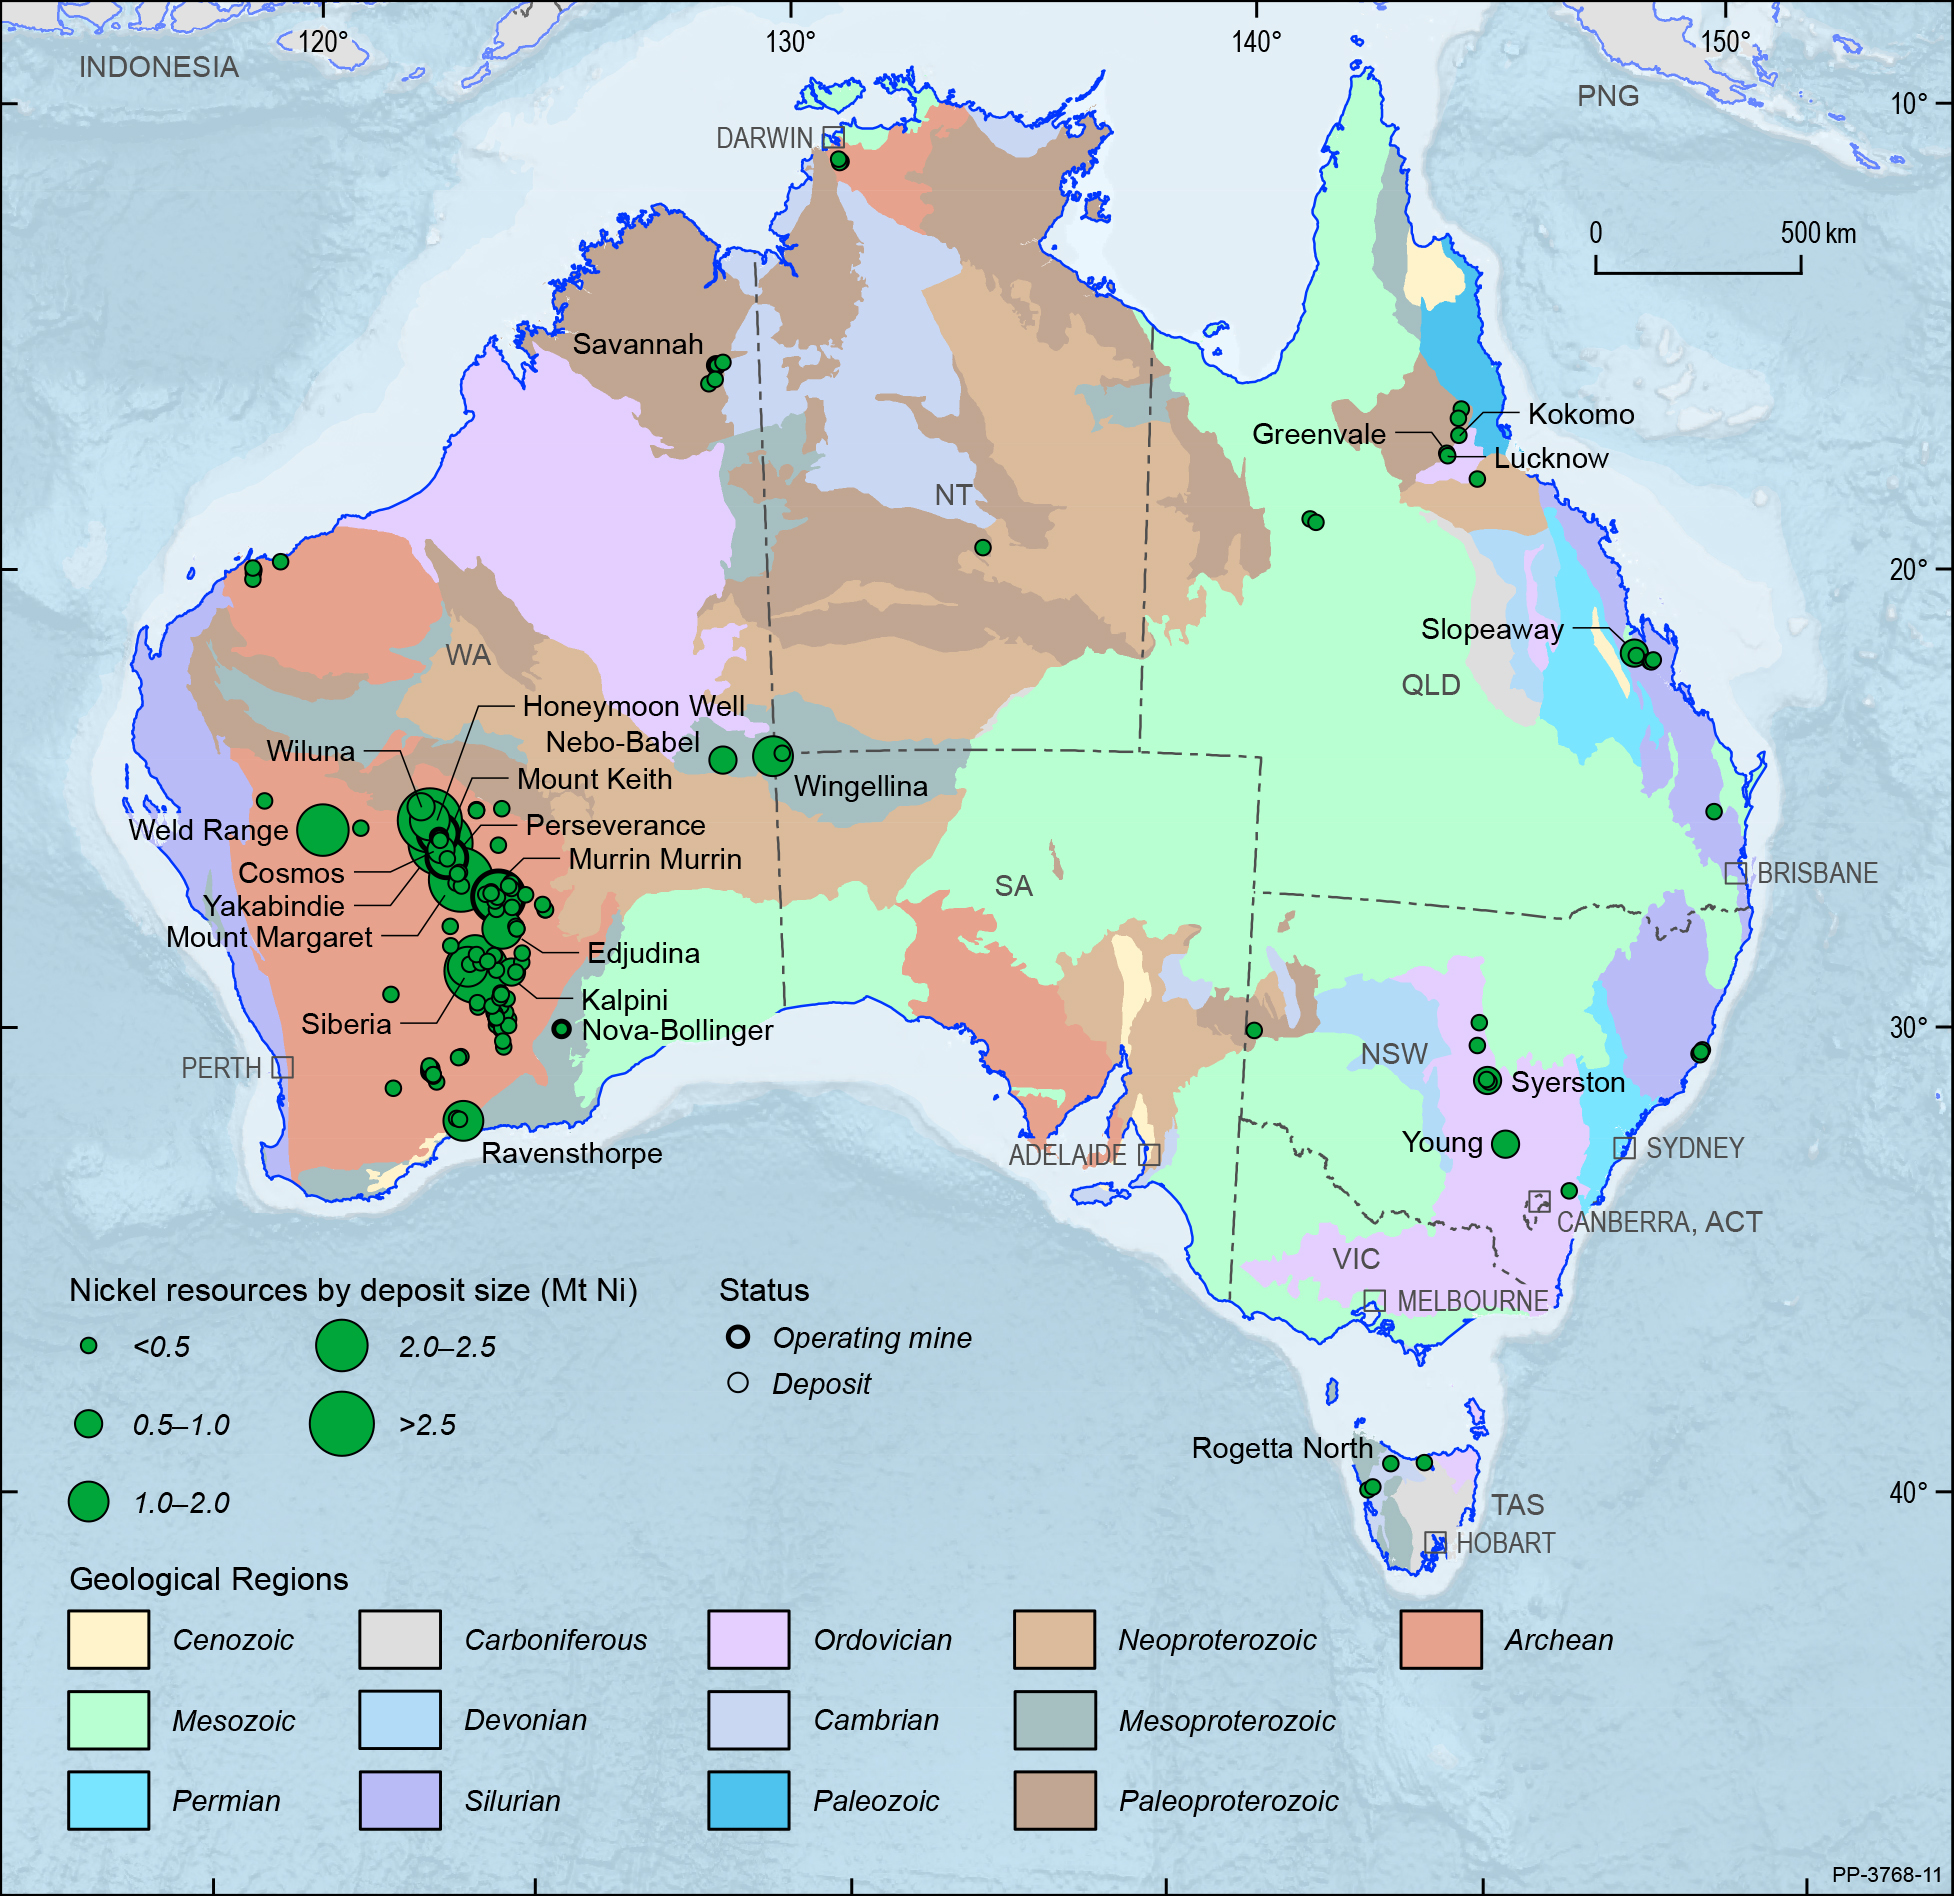 A map showing the Australian continent shaded by the ages of the main geological provinces highlighting the geographical distribution of Australian nickel deposits and operating mines in 2019.